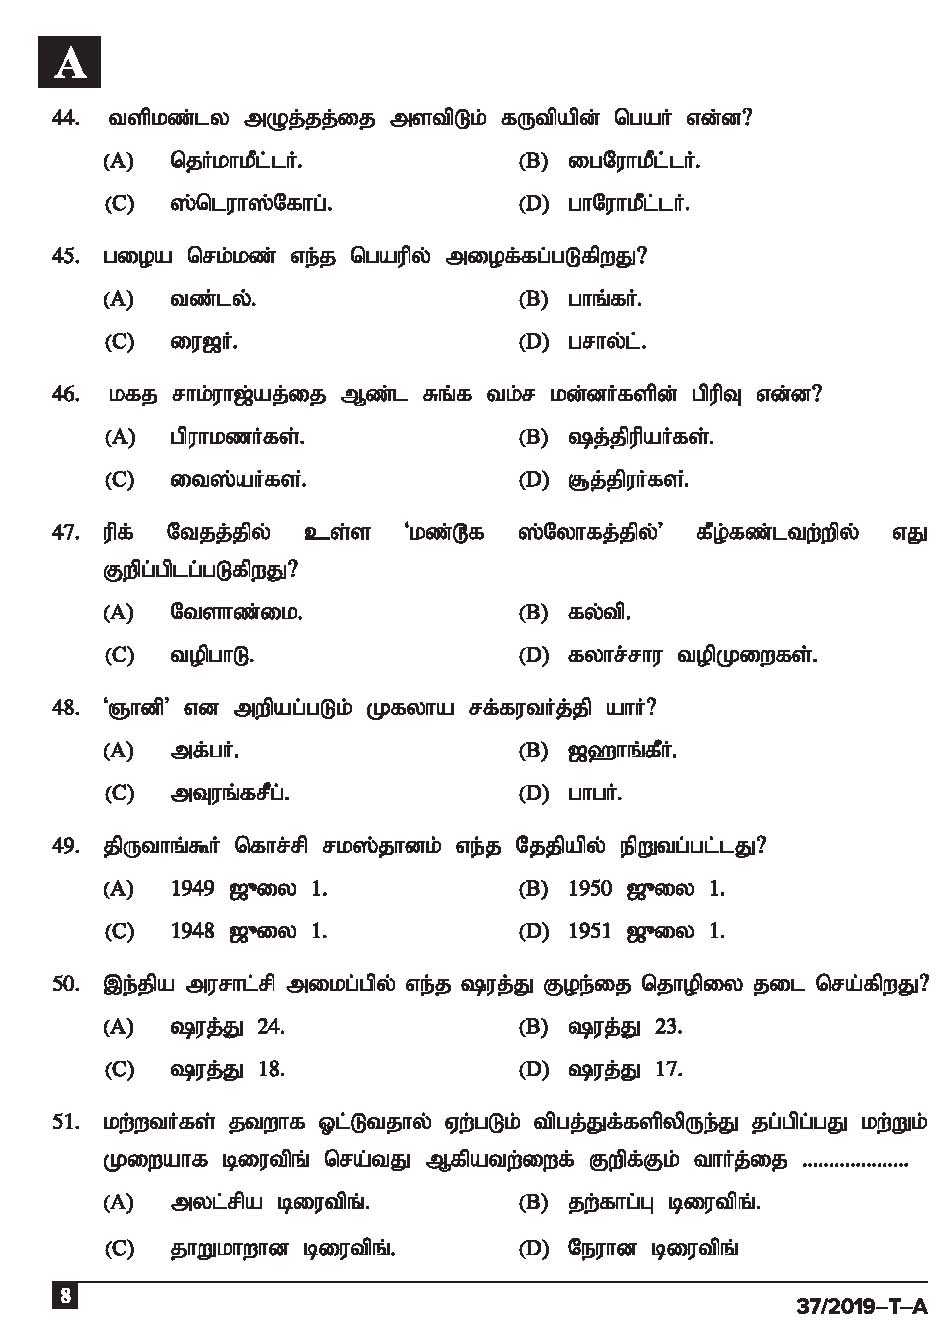 KPSC Driver and Office Attendant Tamil Exam 2019 Code 372019 T 7